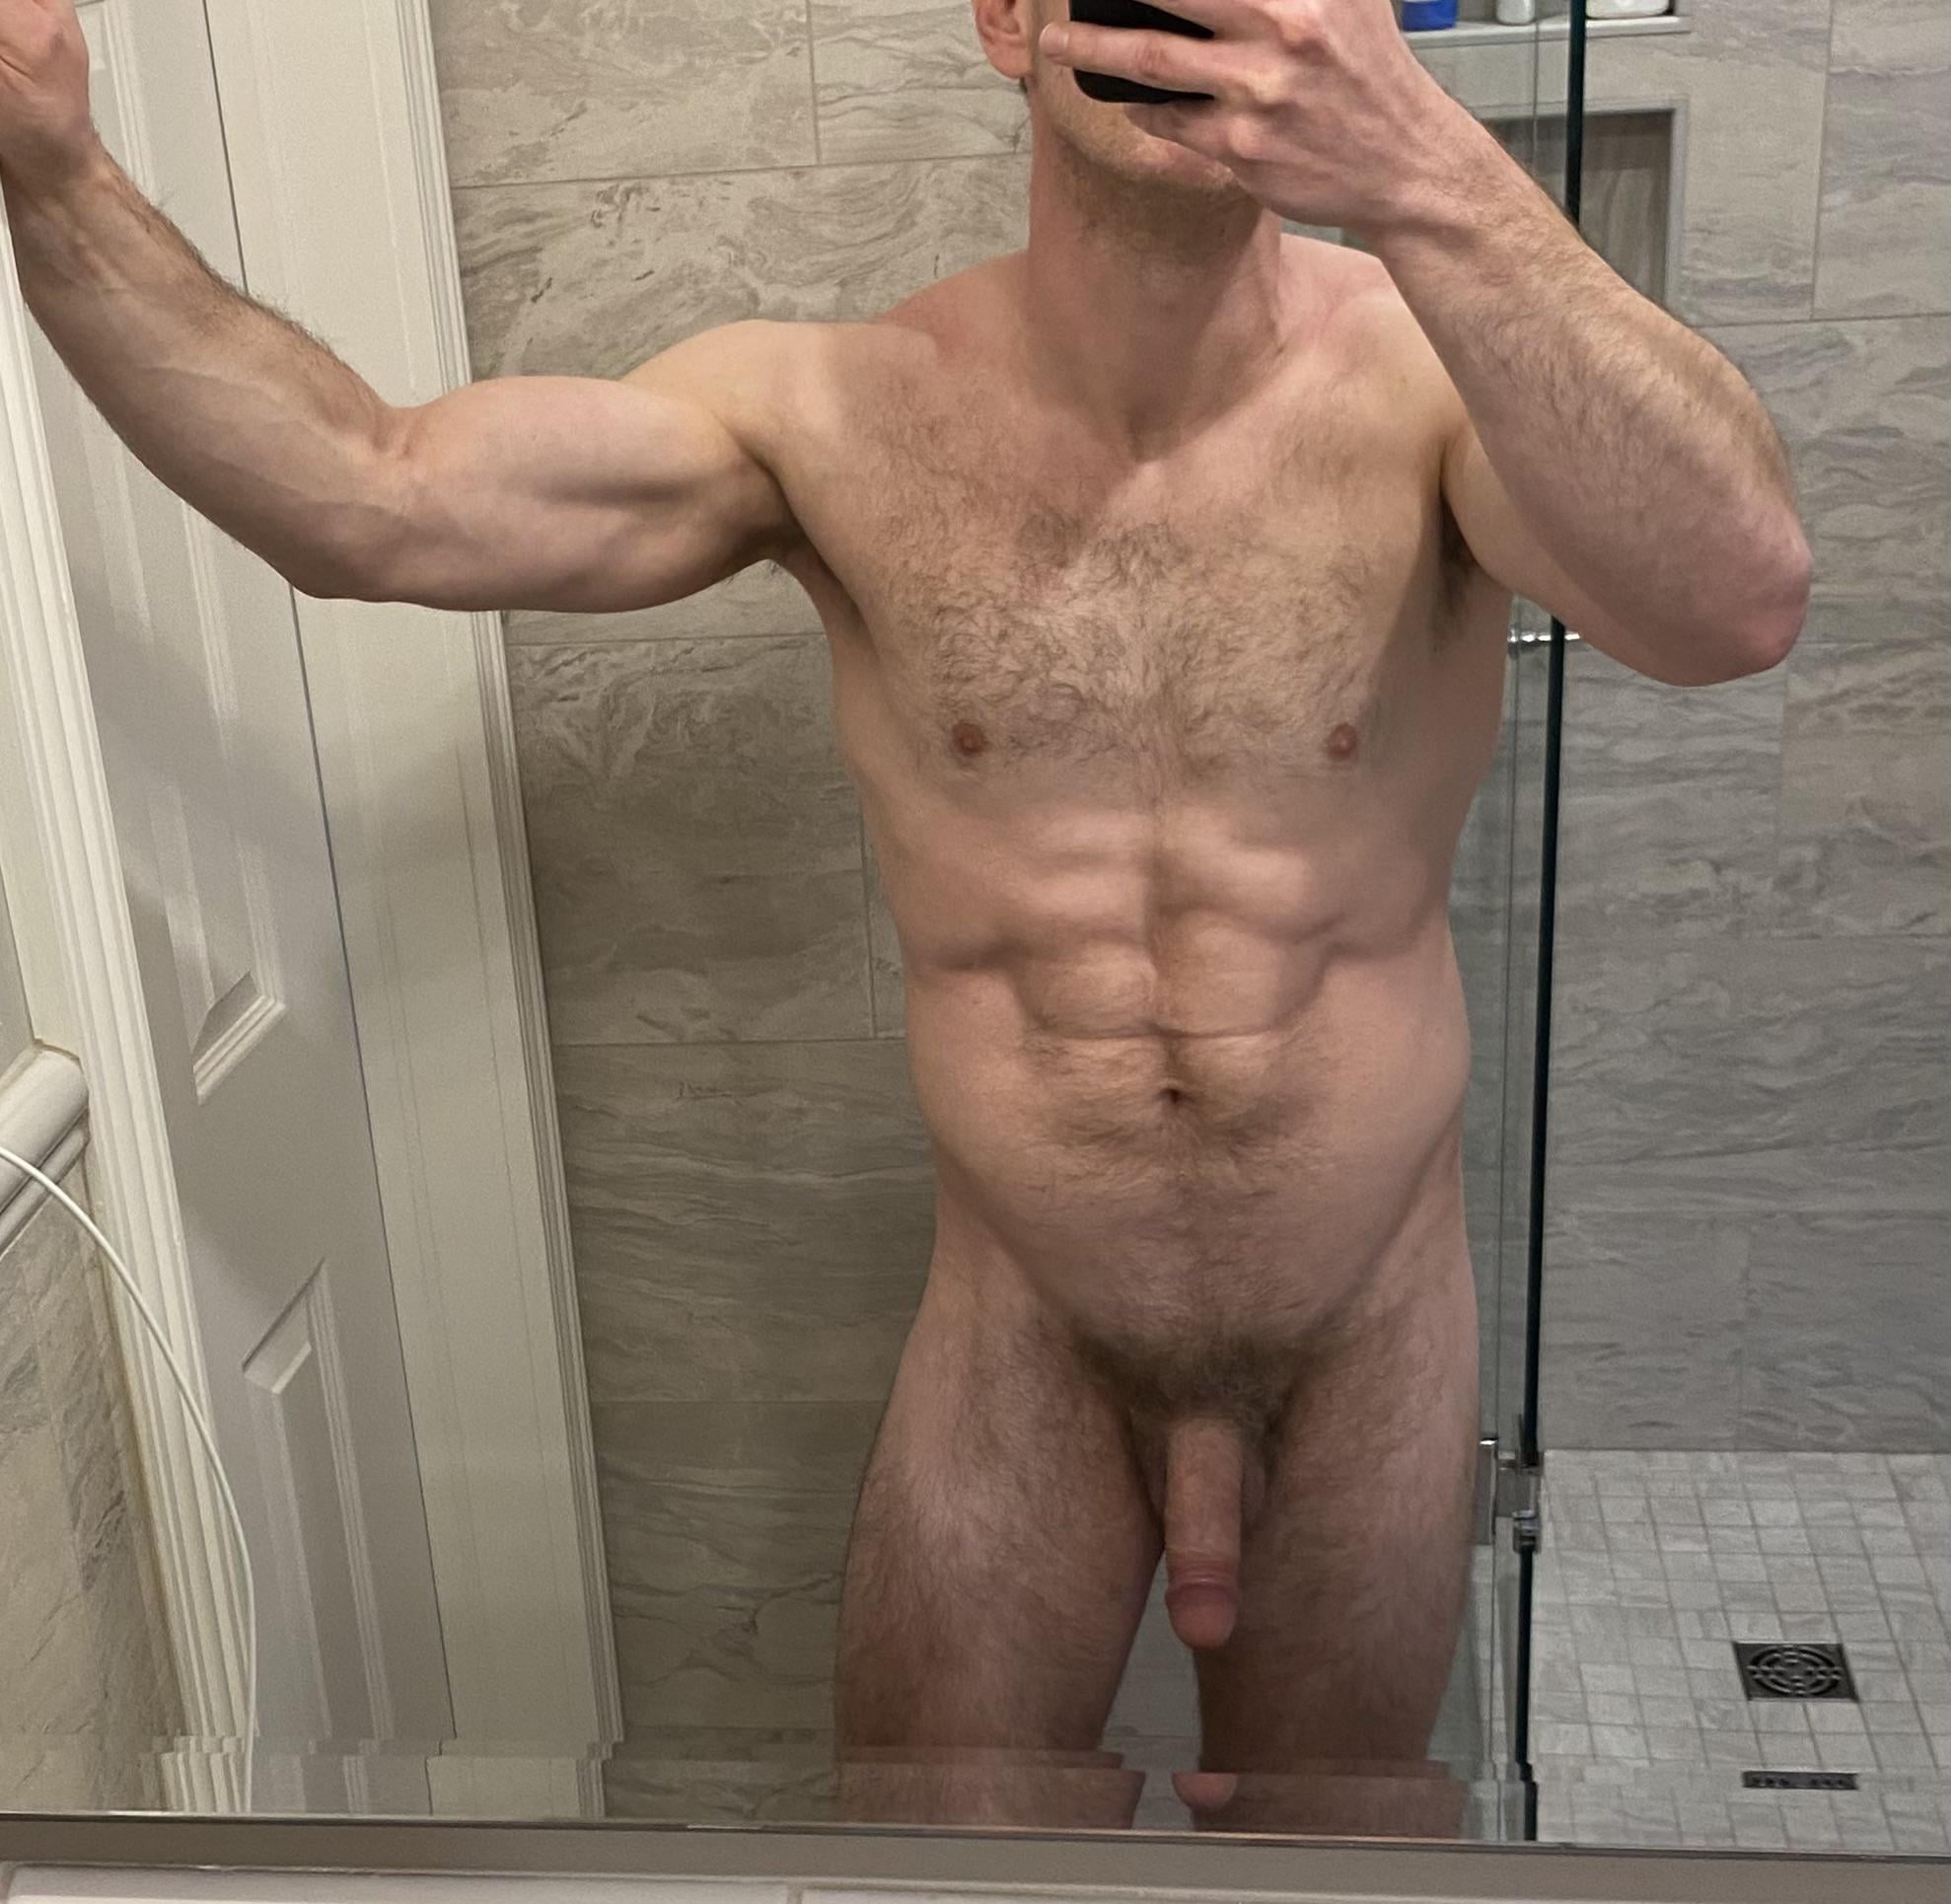 New here Is buff and hairy welcome